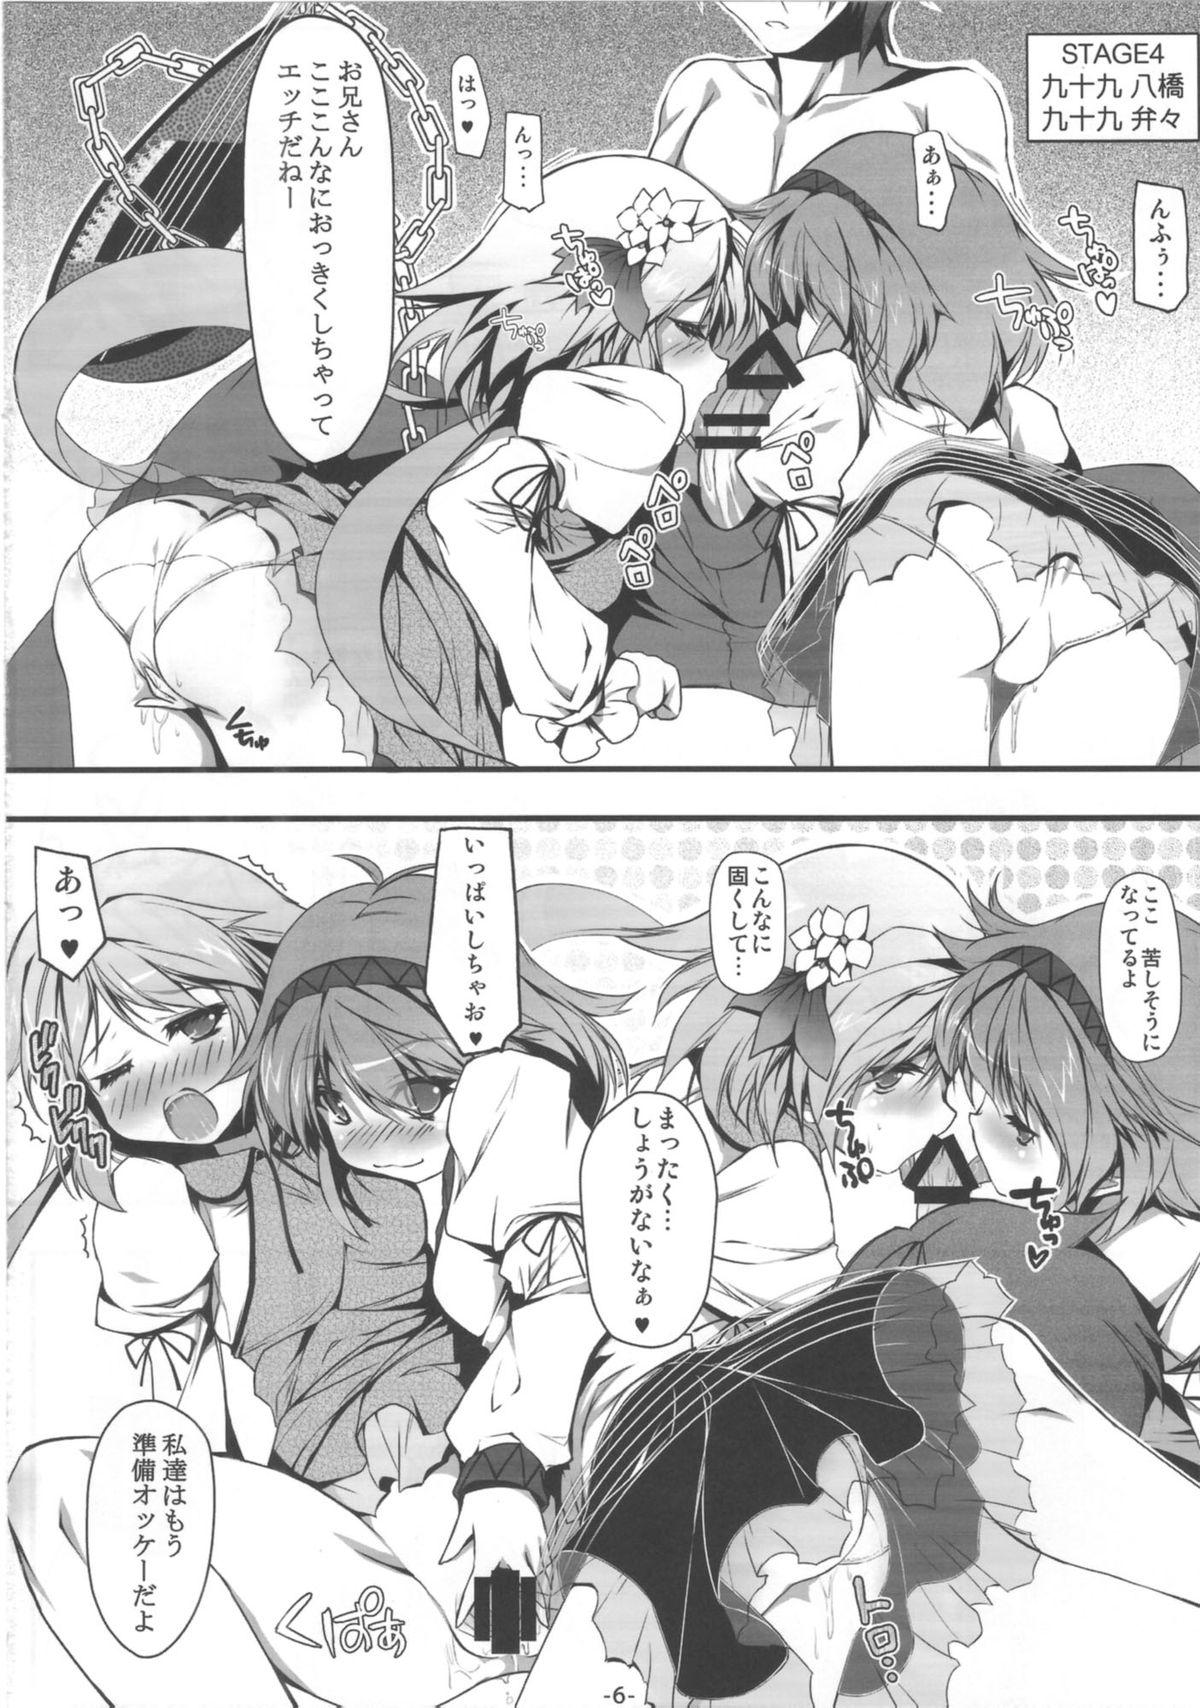 Milfporn Ookikuna ~ Re!? - Touhou project Office - Page 7